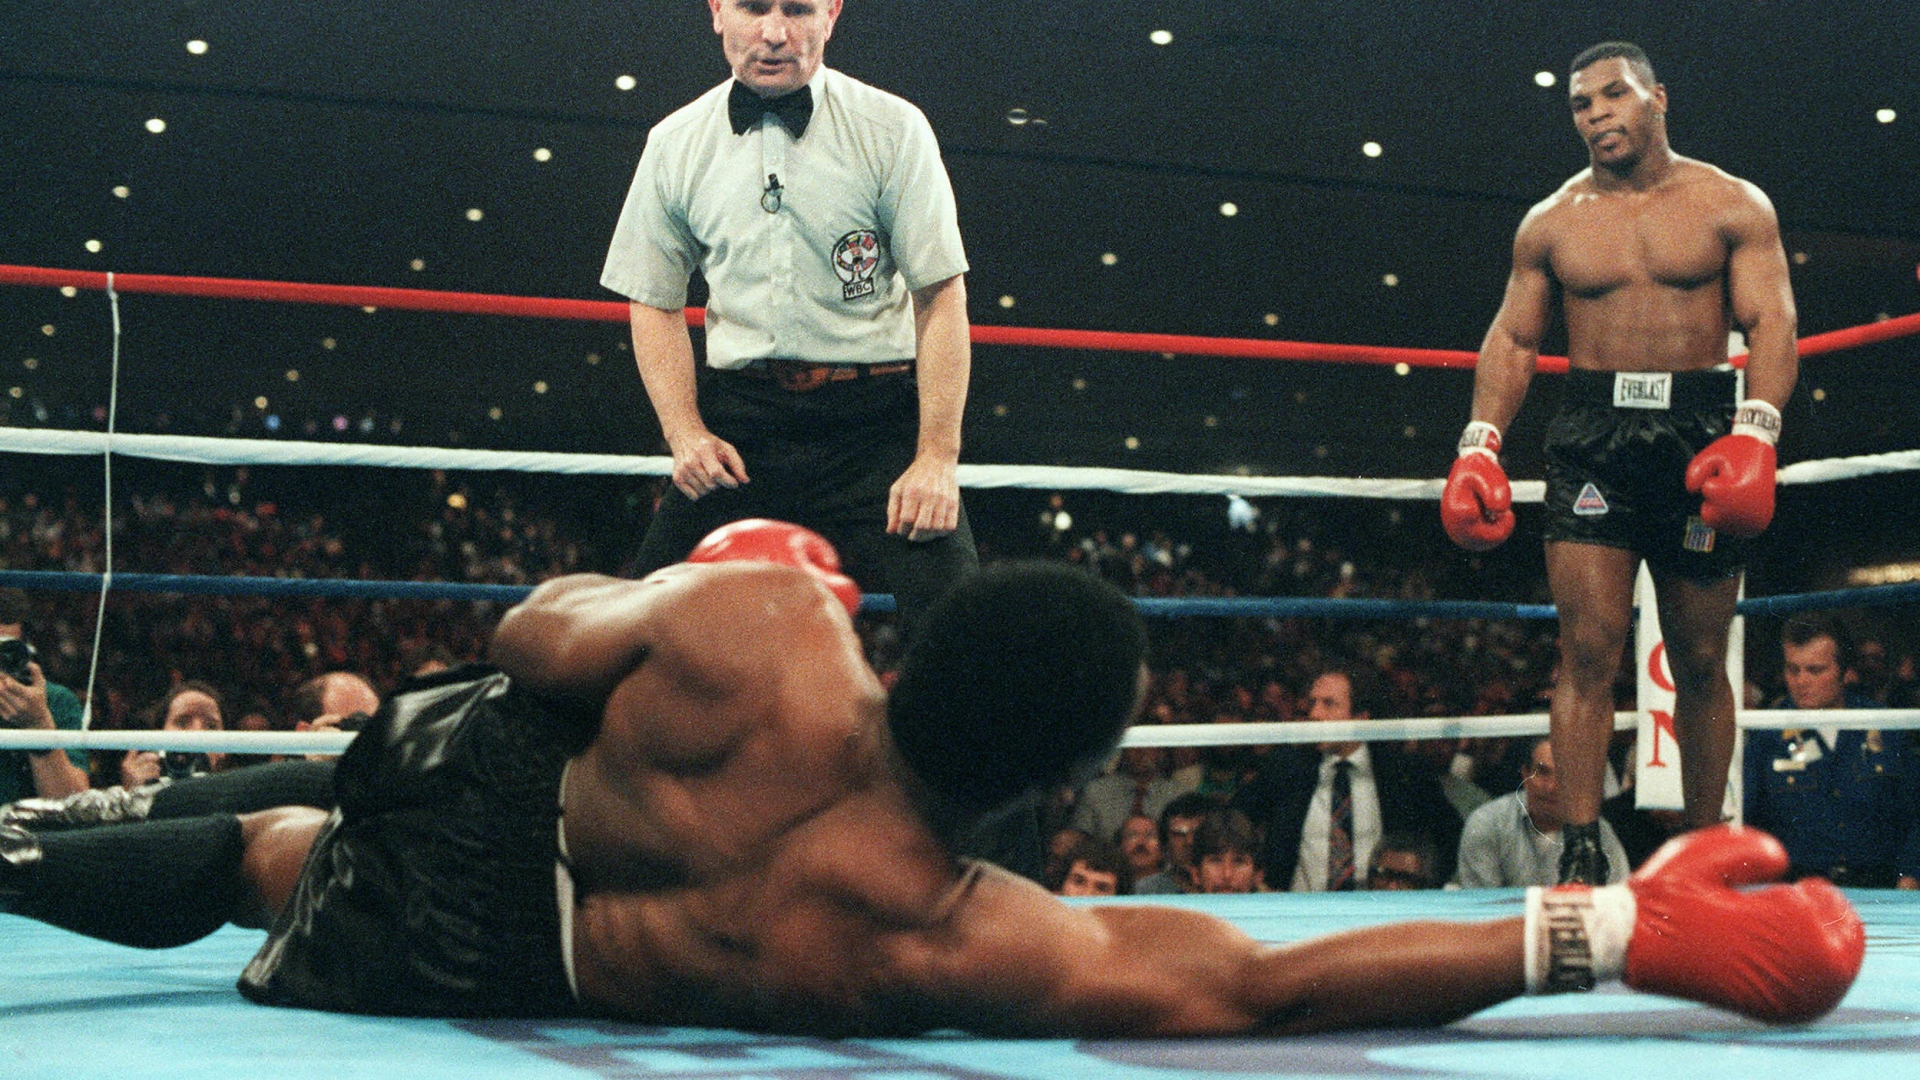 Mike Tyson destroyed Trevor Berbick to become the youngest world heavyweight boxing champion he has the chance to relive glory nights in Roy Jones Jr fight